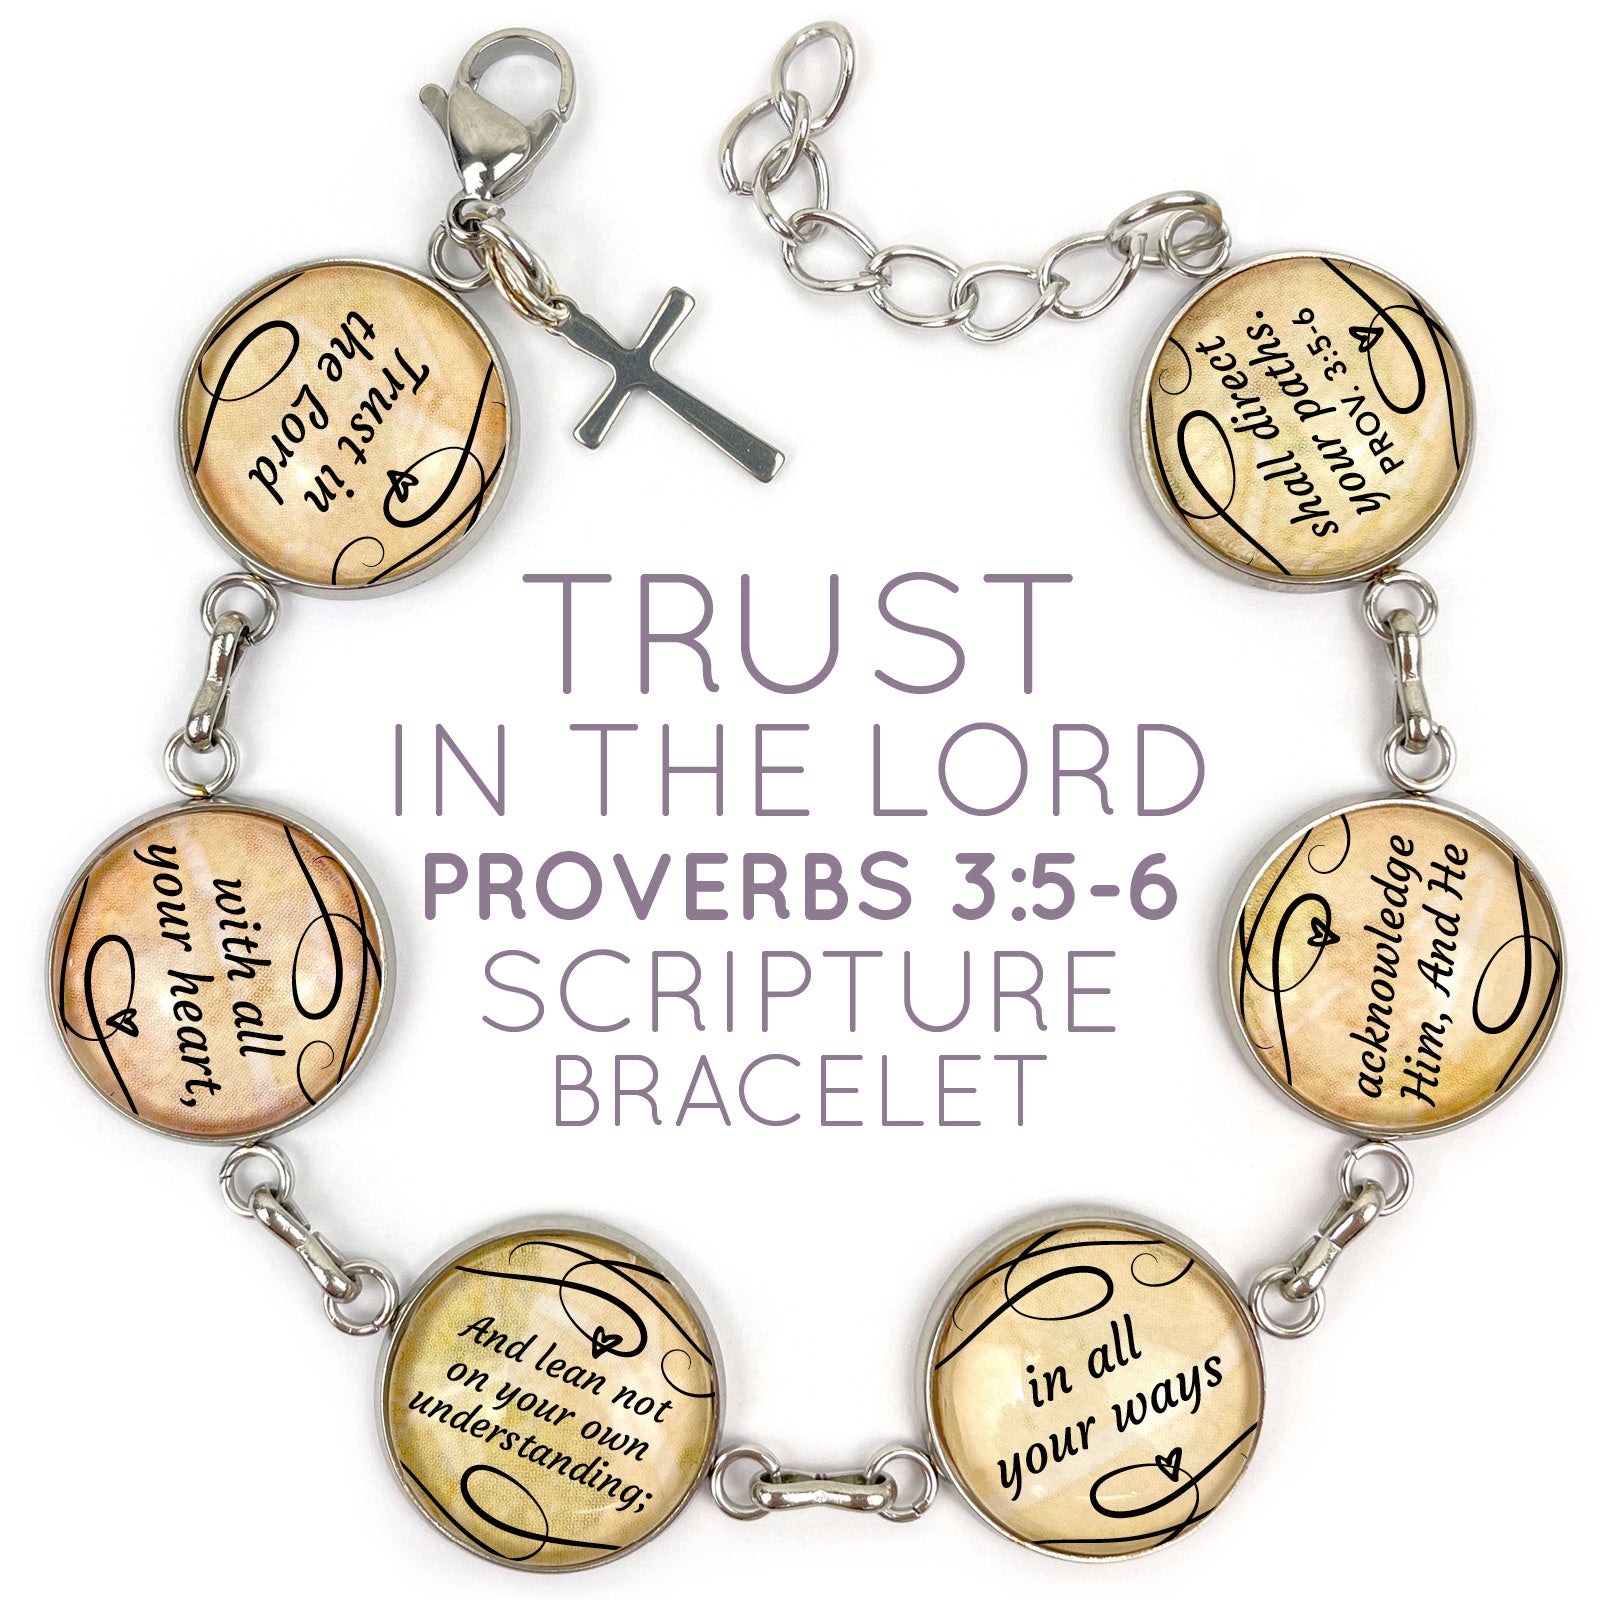 Trust in the Lord Scripture Charm Bracelet - Proverbs 3:5-6, Glass Charms, Stainless Steel - Bracelets - Bijou Her -  -  - 